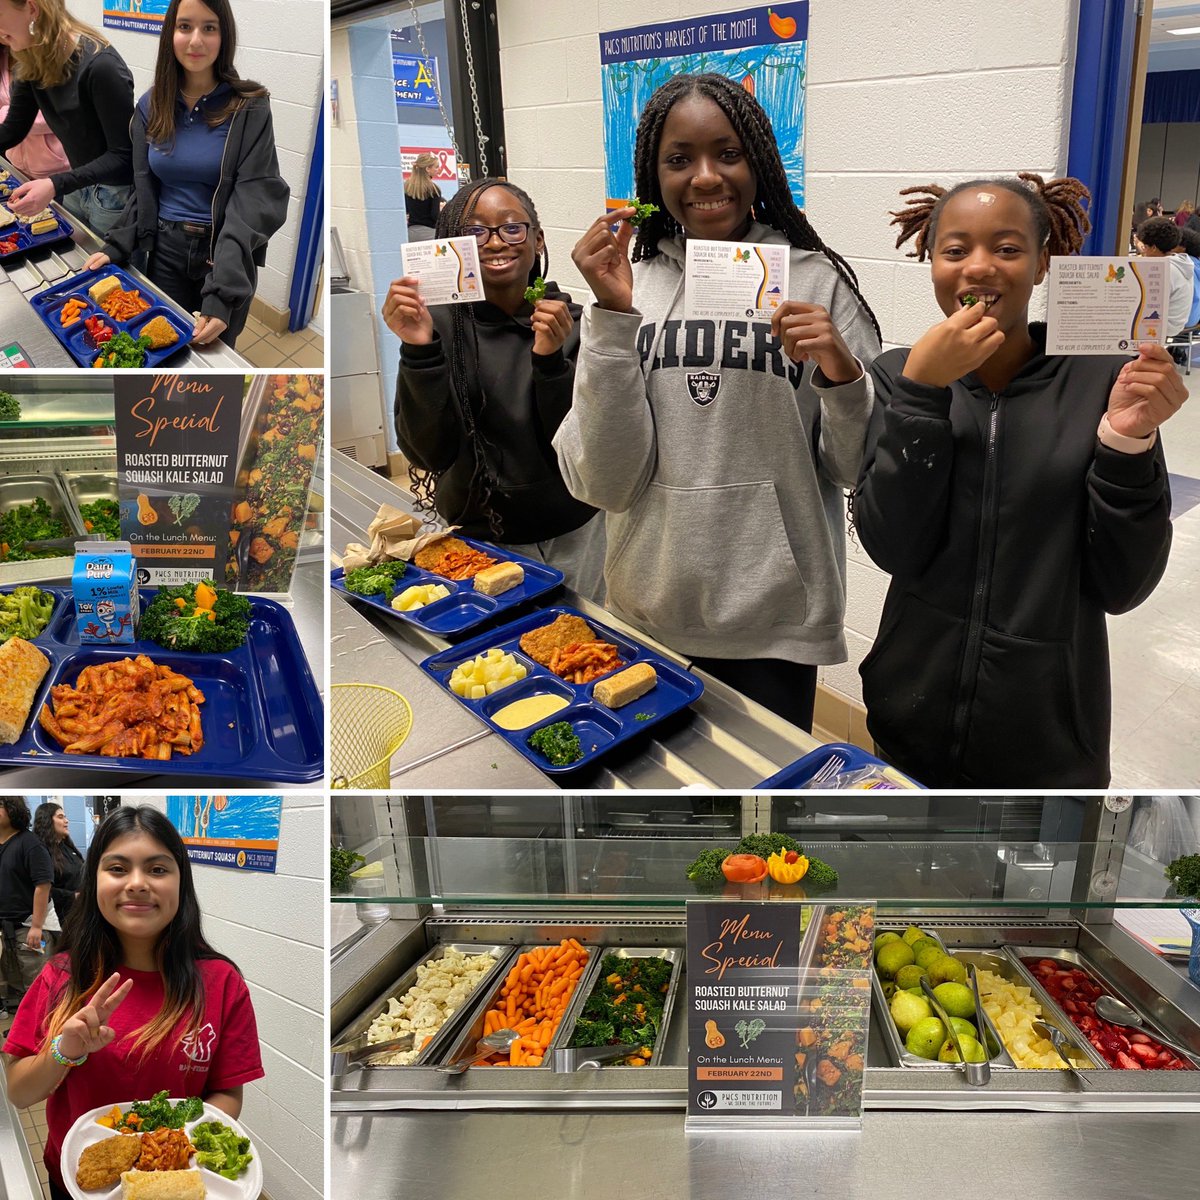 Our #HarvestOfTheMonth Roasted Butternut Squash Kale Salad was on the Middle School menu today! Students at @SaundersPWCS enjoyed trying this colorful new salad! #ButternutSquash #SchoolLunch #ThinkLocalThursdays #NoKidHungry